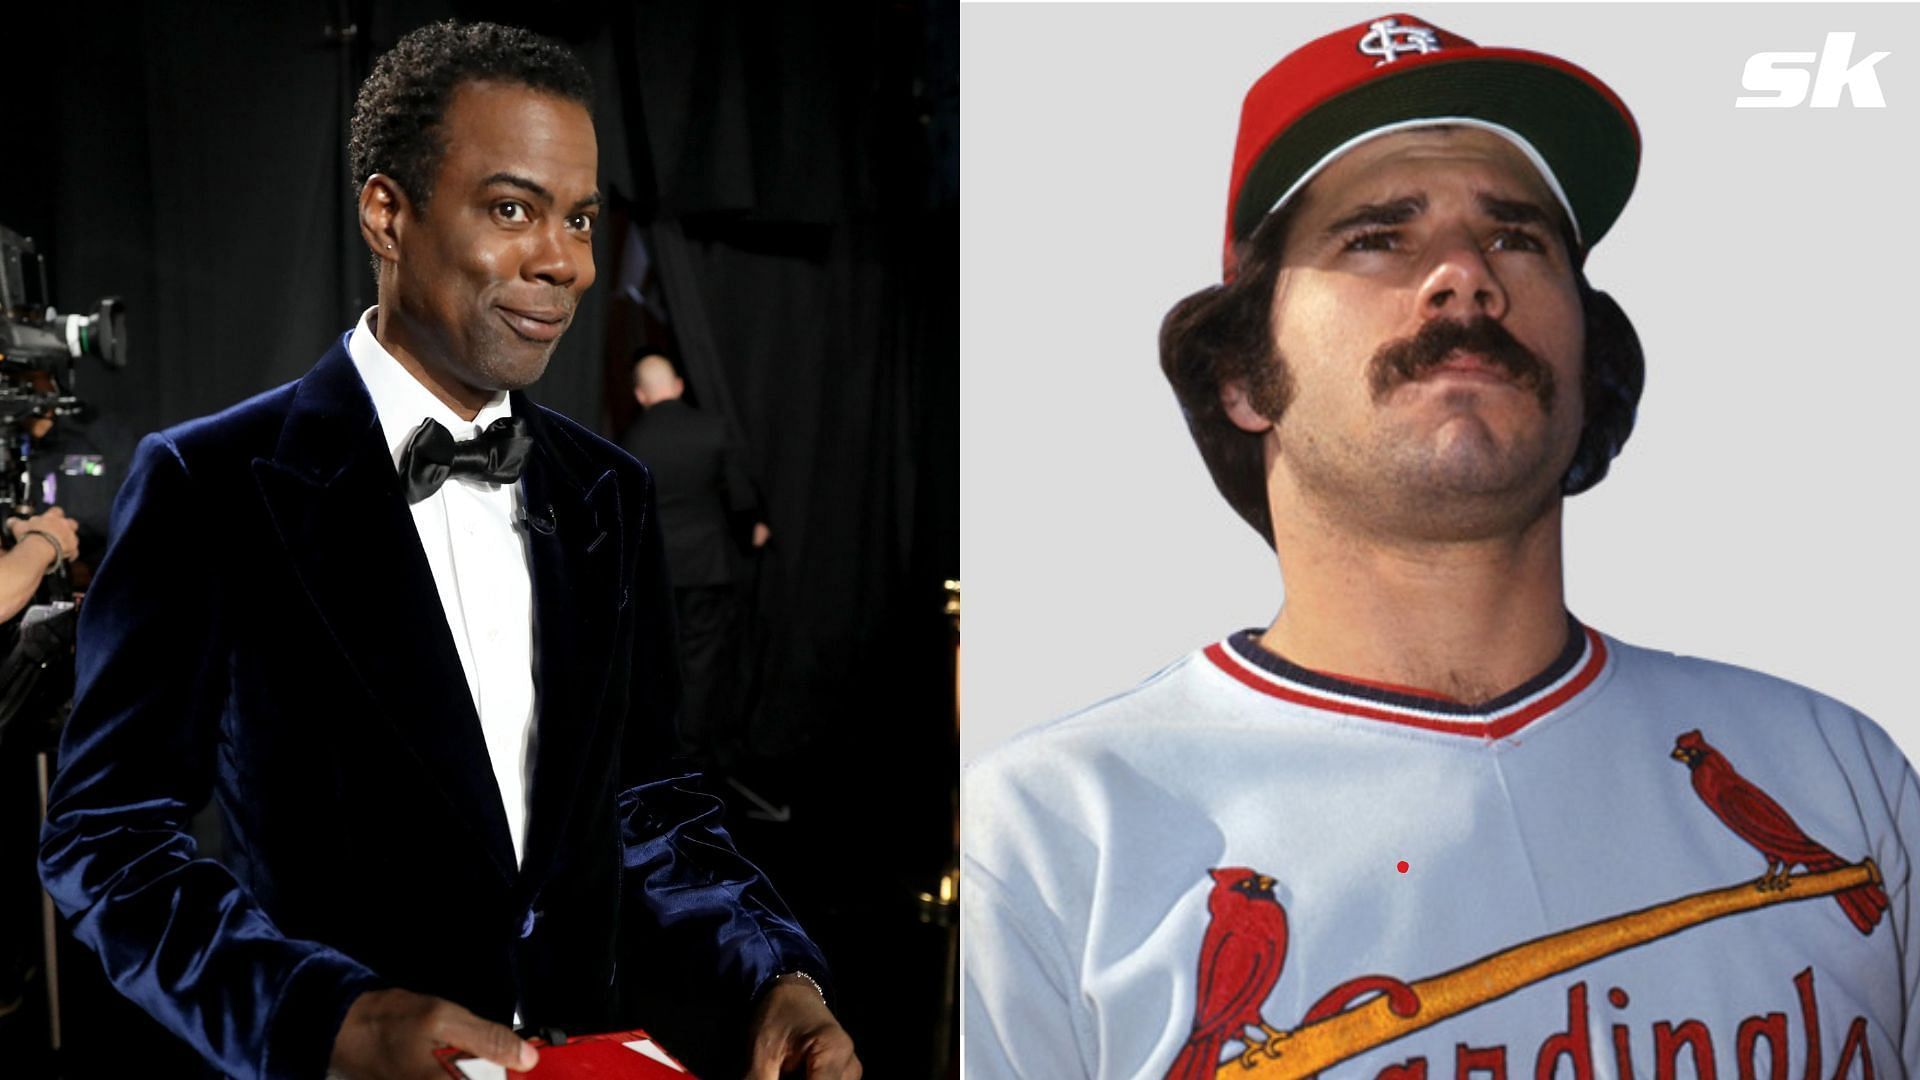 Chris Rock showed off his MLB knowledge by referencing a Cardinals old-timer